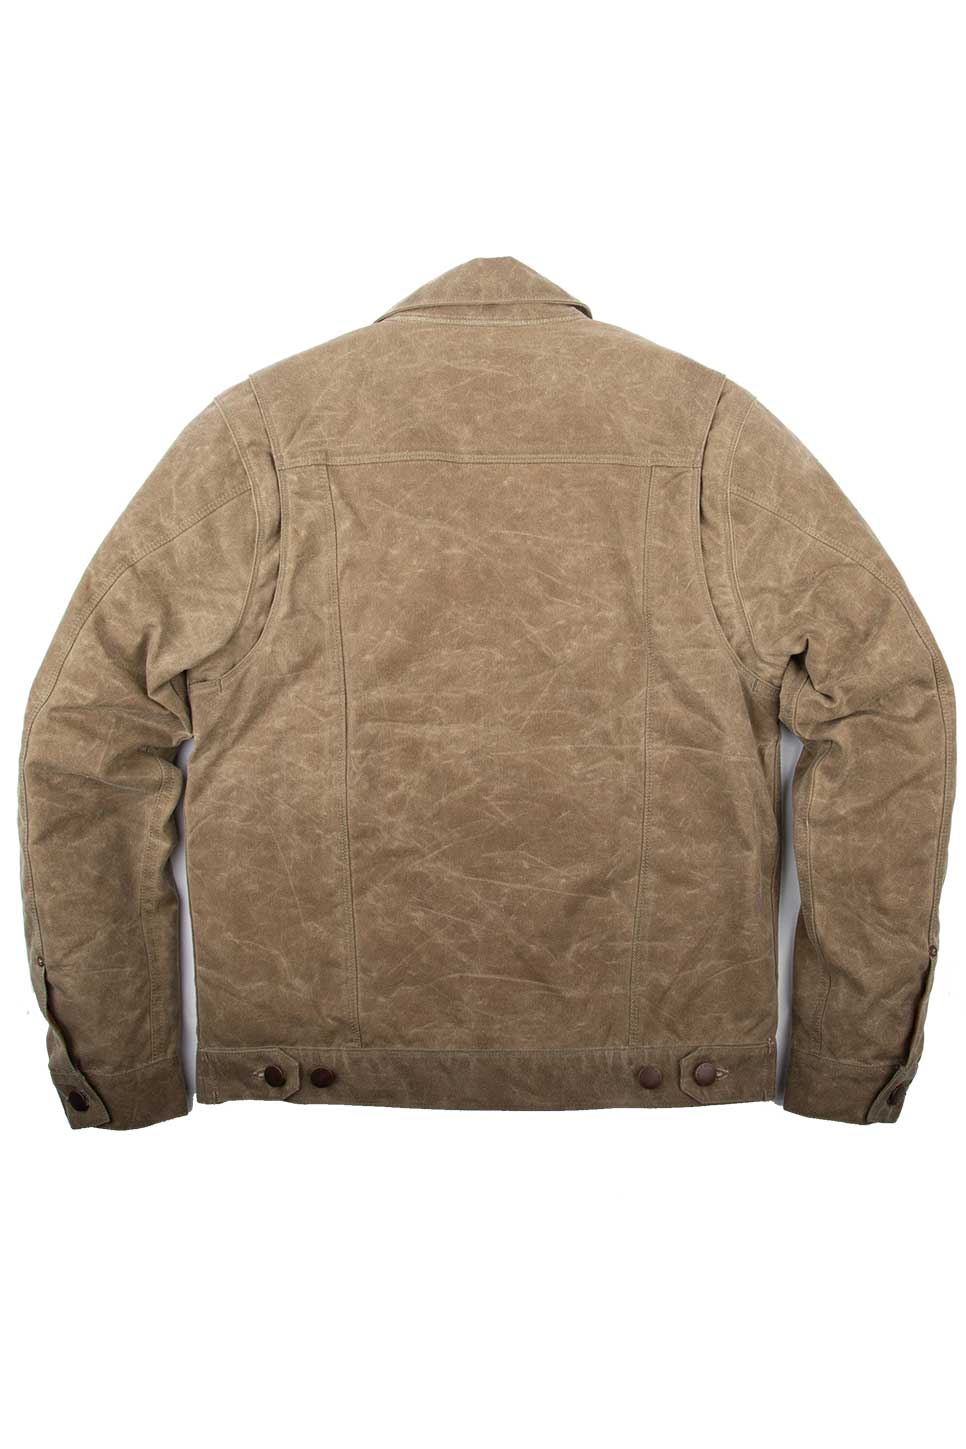 WAXED RIDERS JACKET - TOBACCO/RED